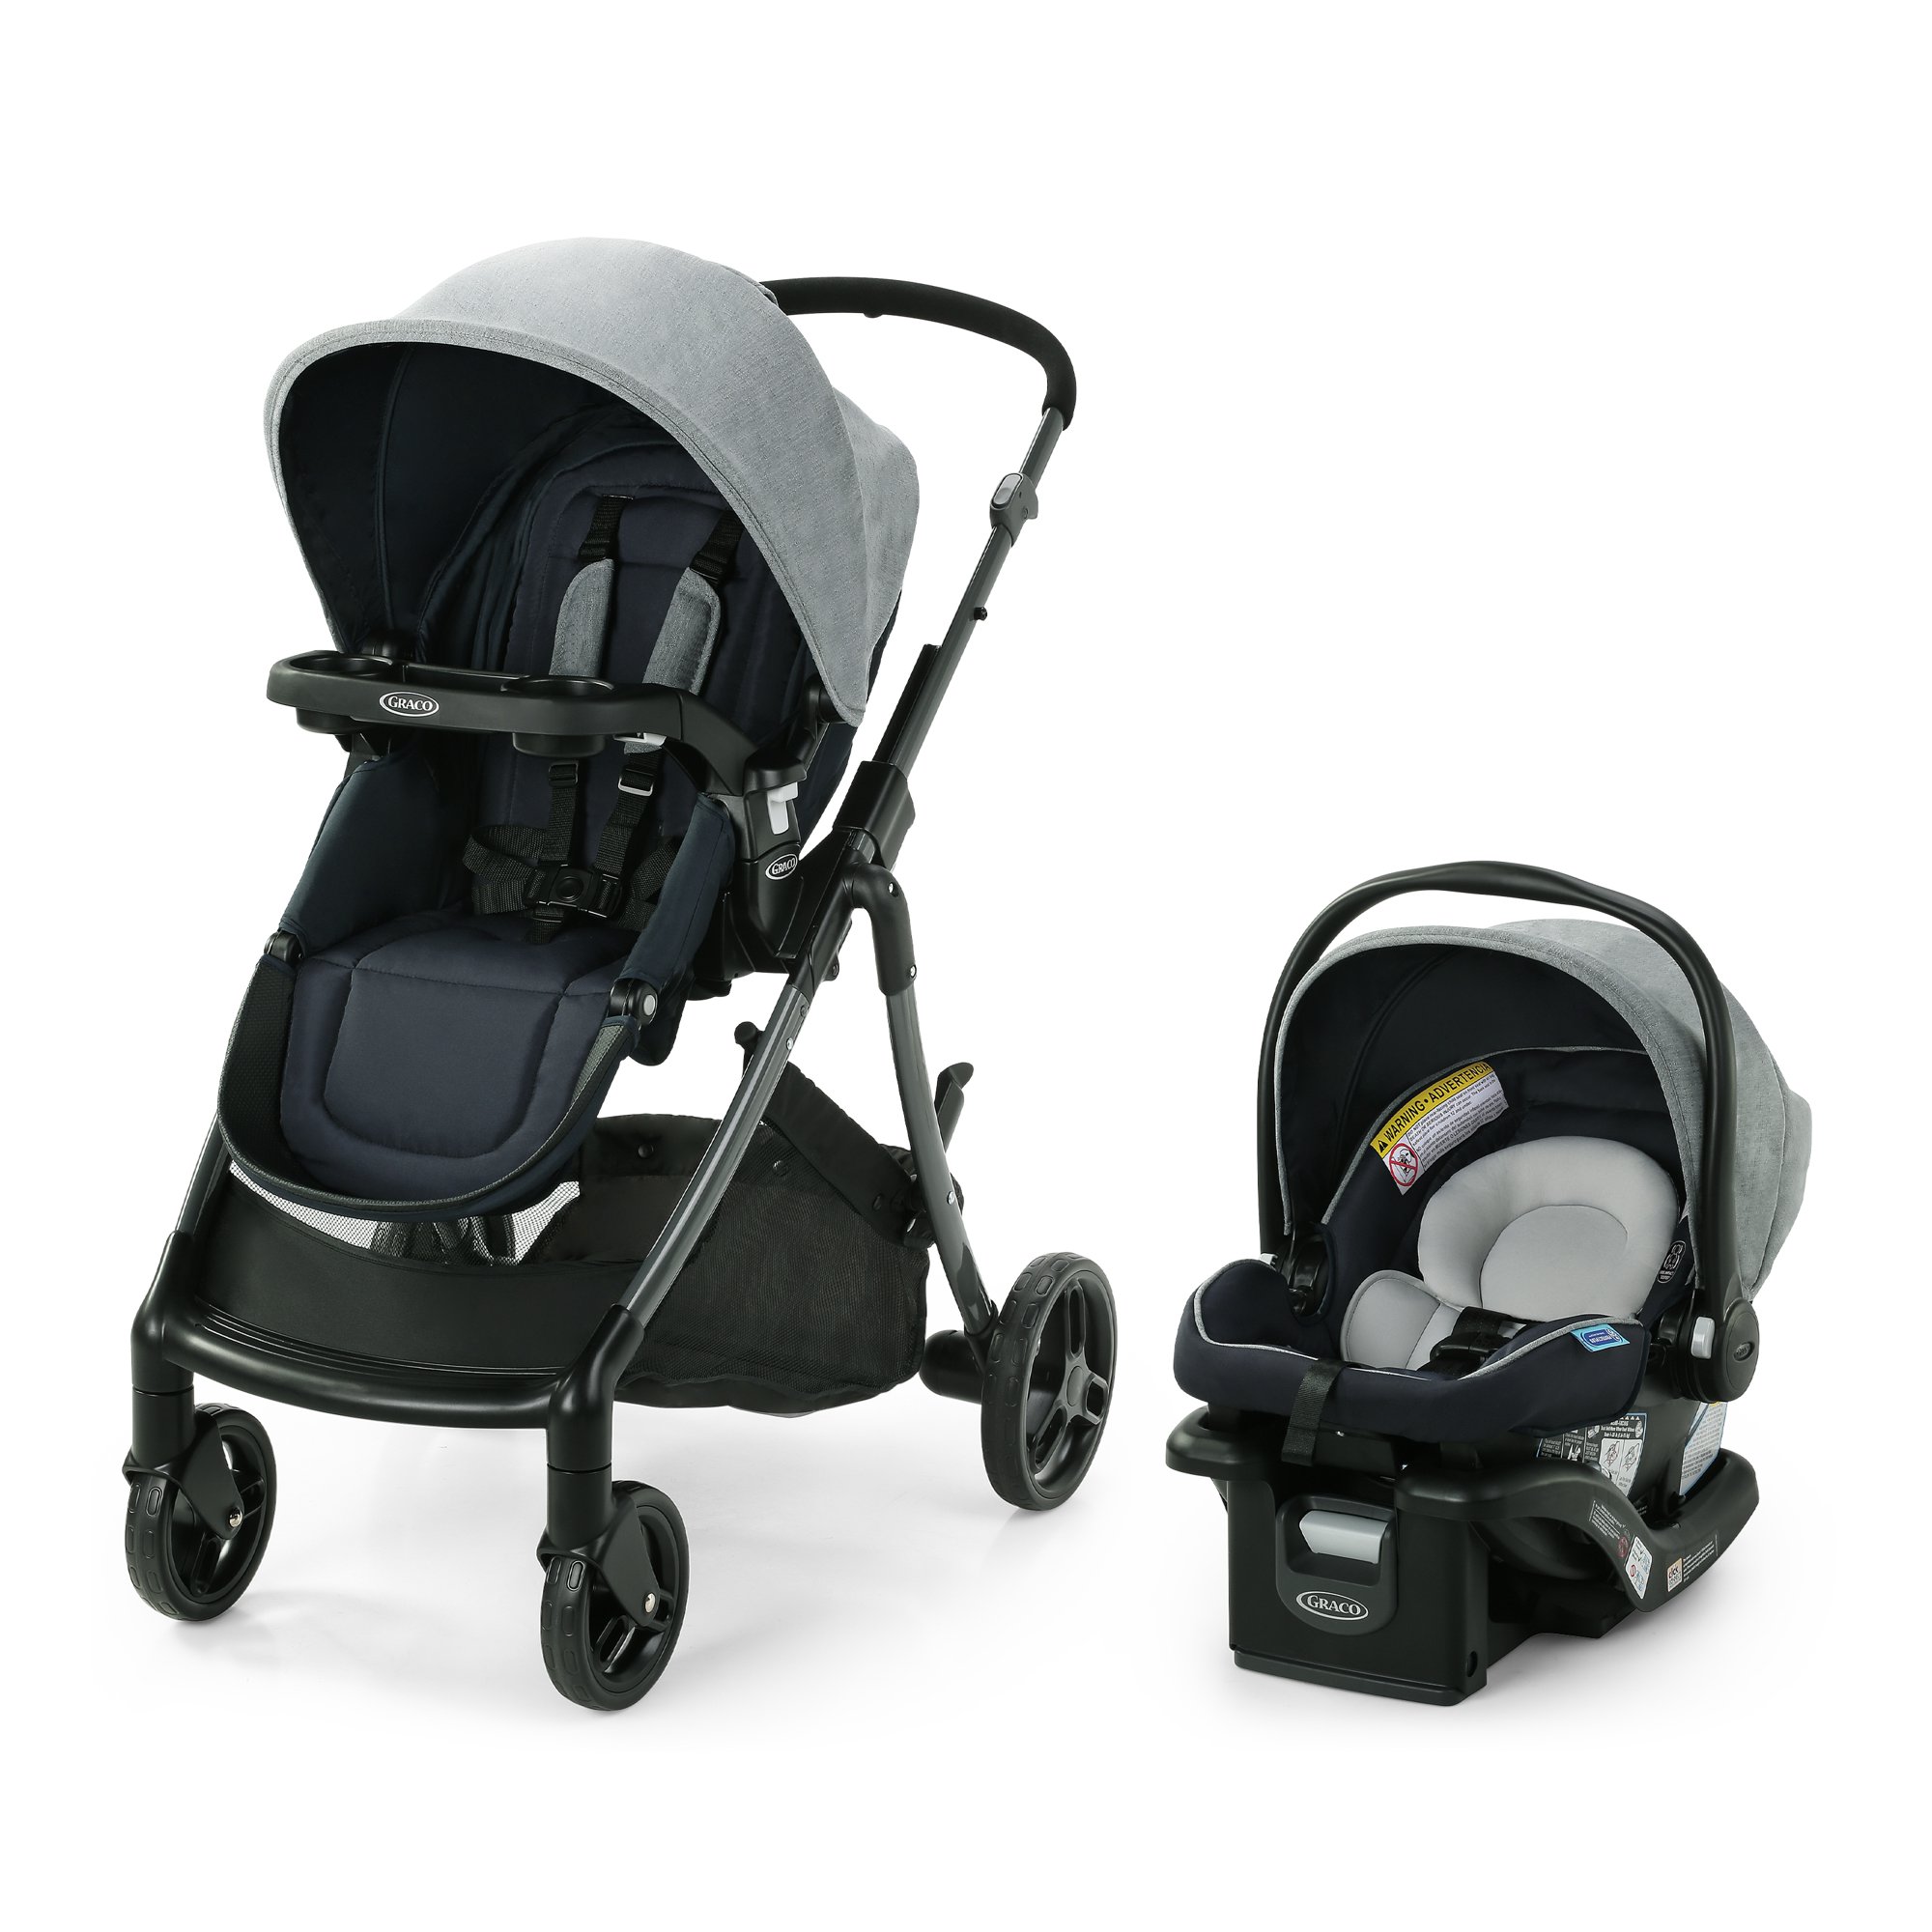 YMMV - Graco Modes Closer 3-in-1 Travel System $159